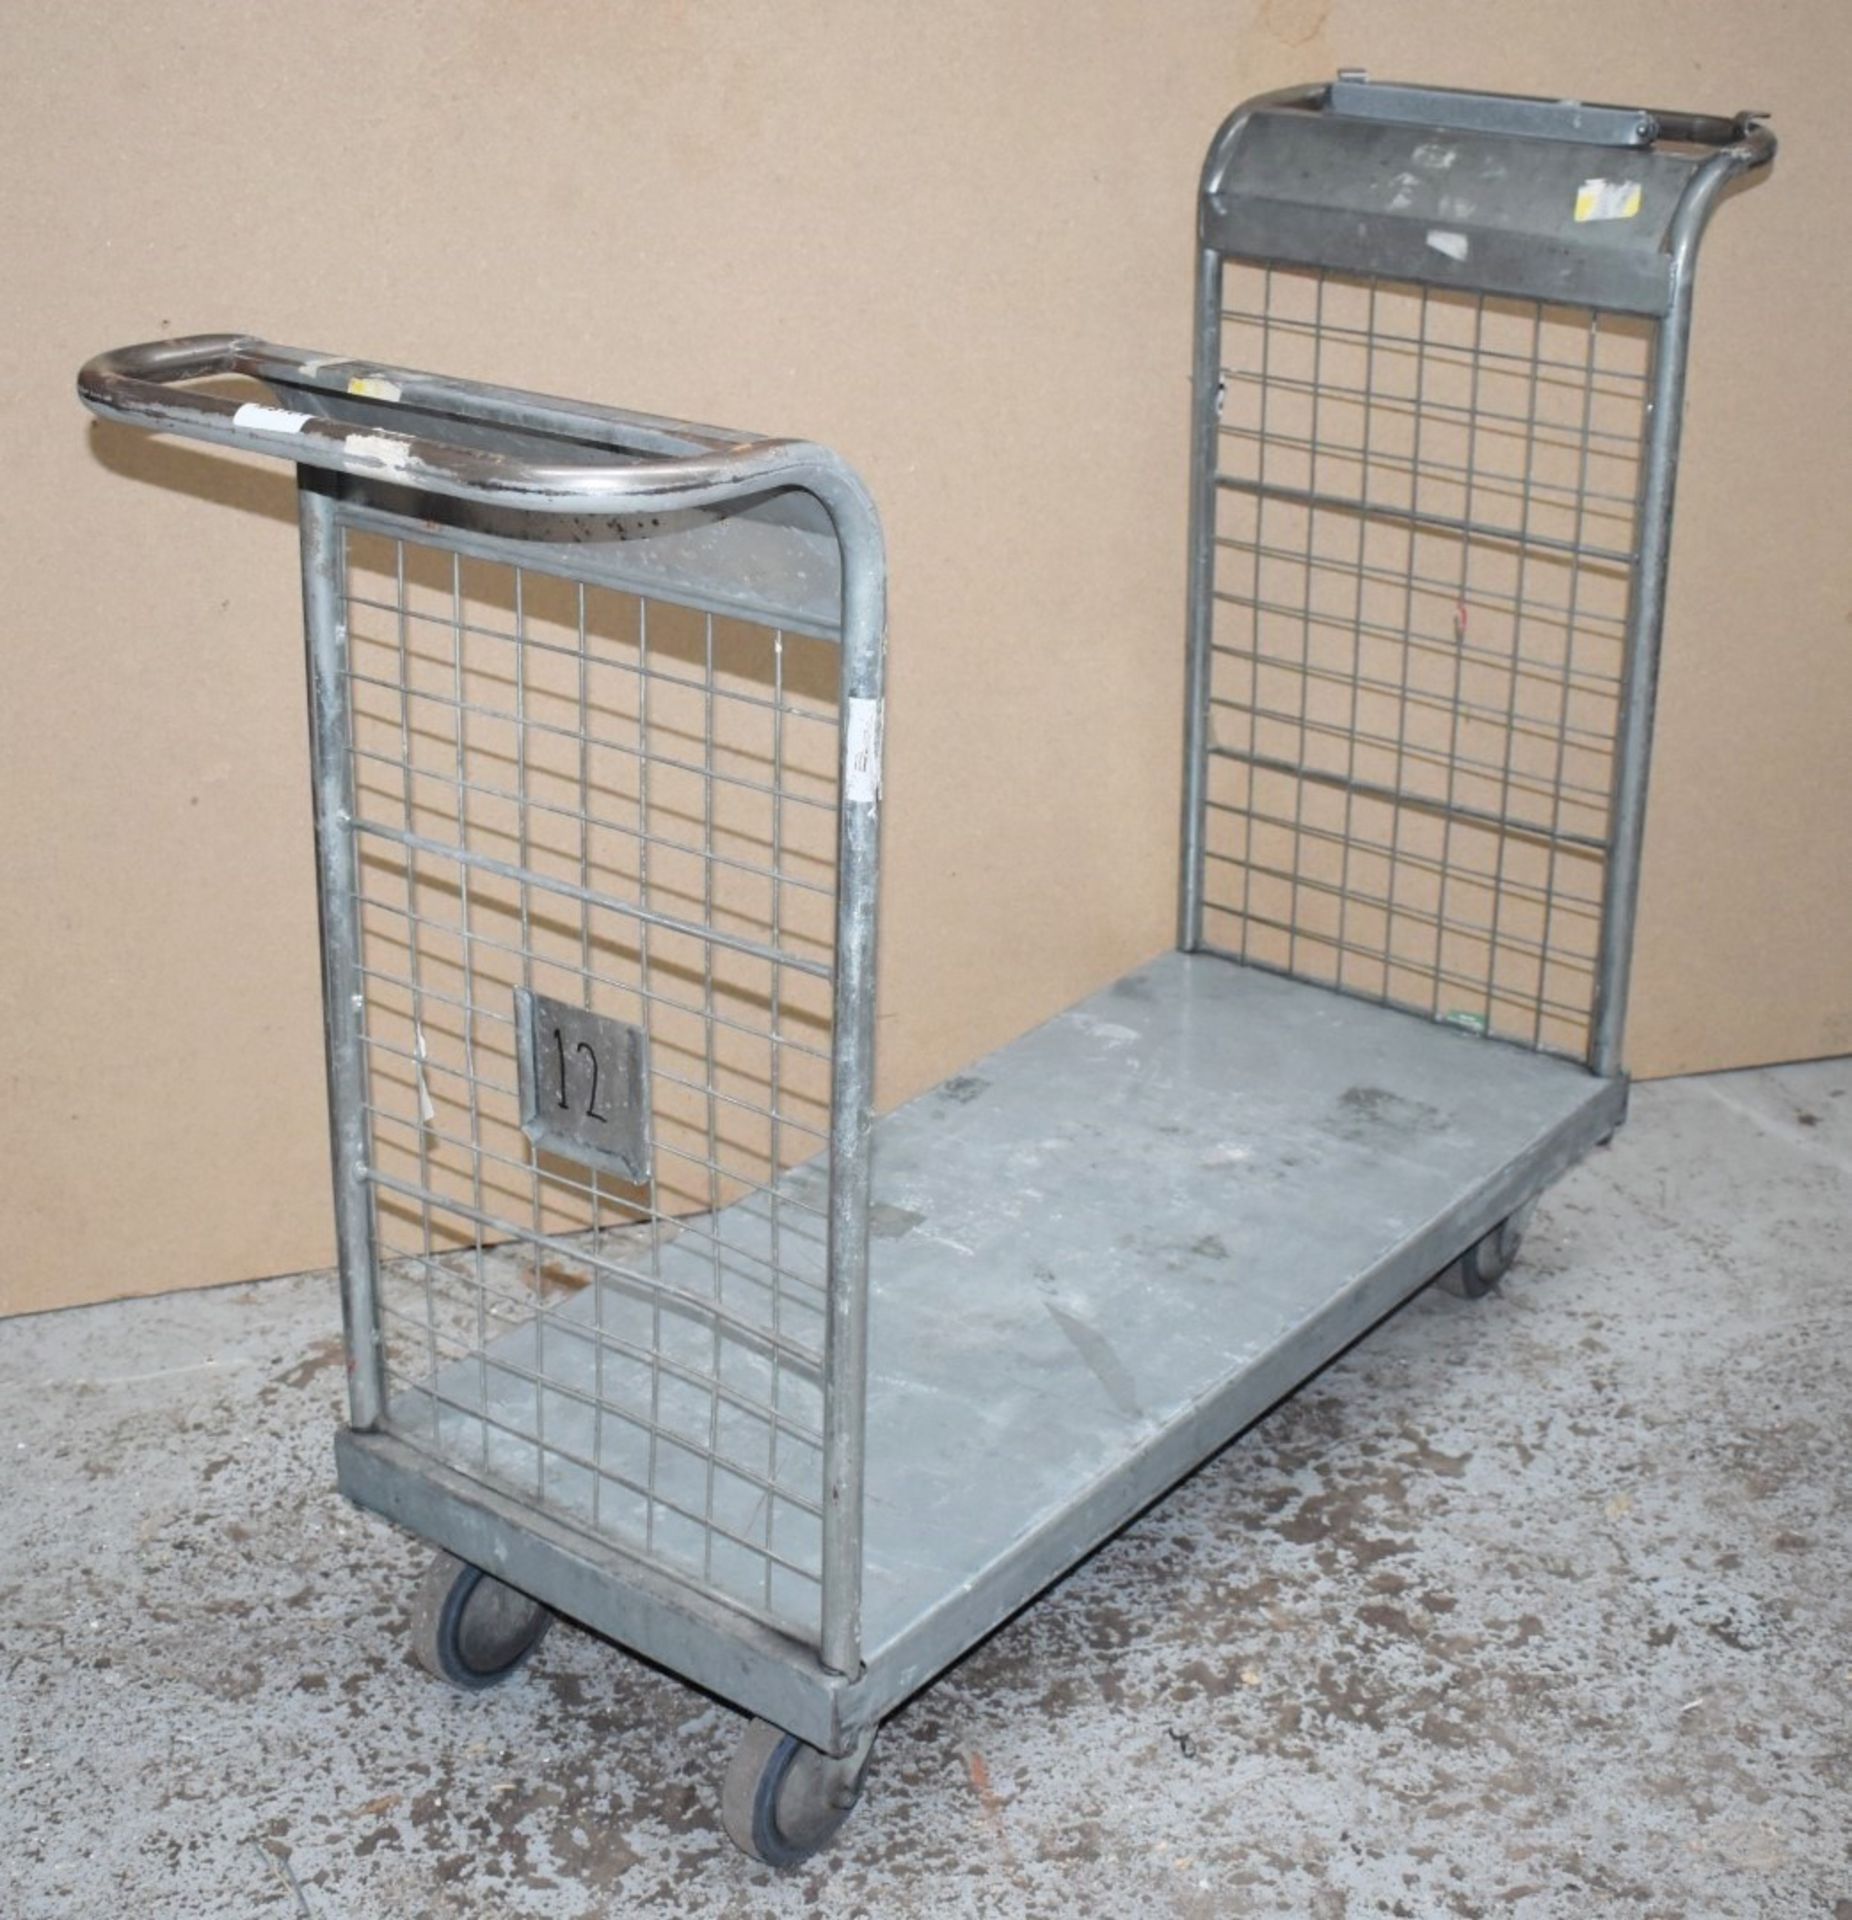 1 x Platform Trolley With Heavy Duty Wheels, Two Handles and Waste Bag Holder - Features a 100 x